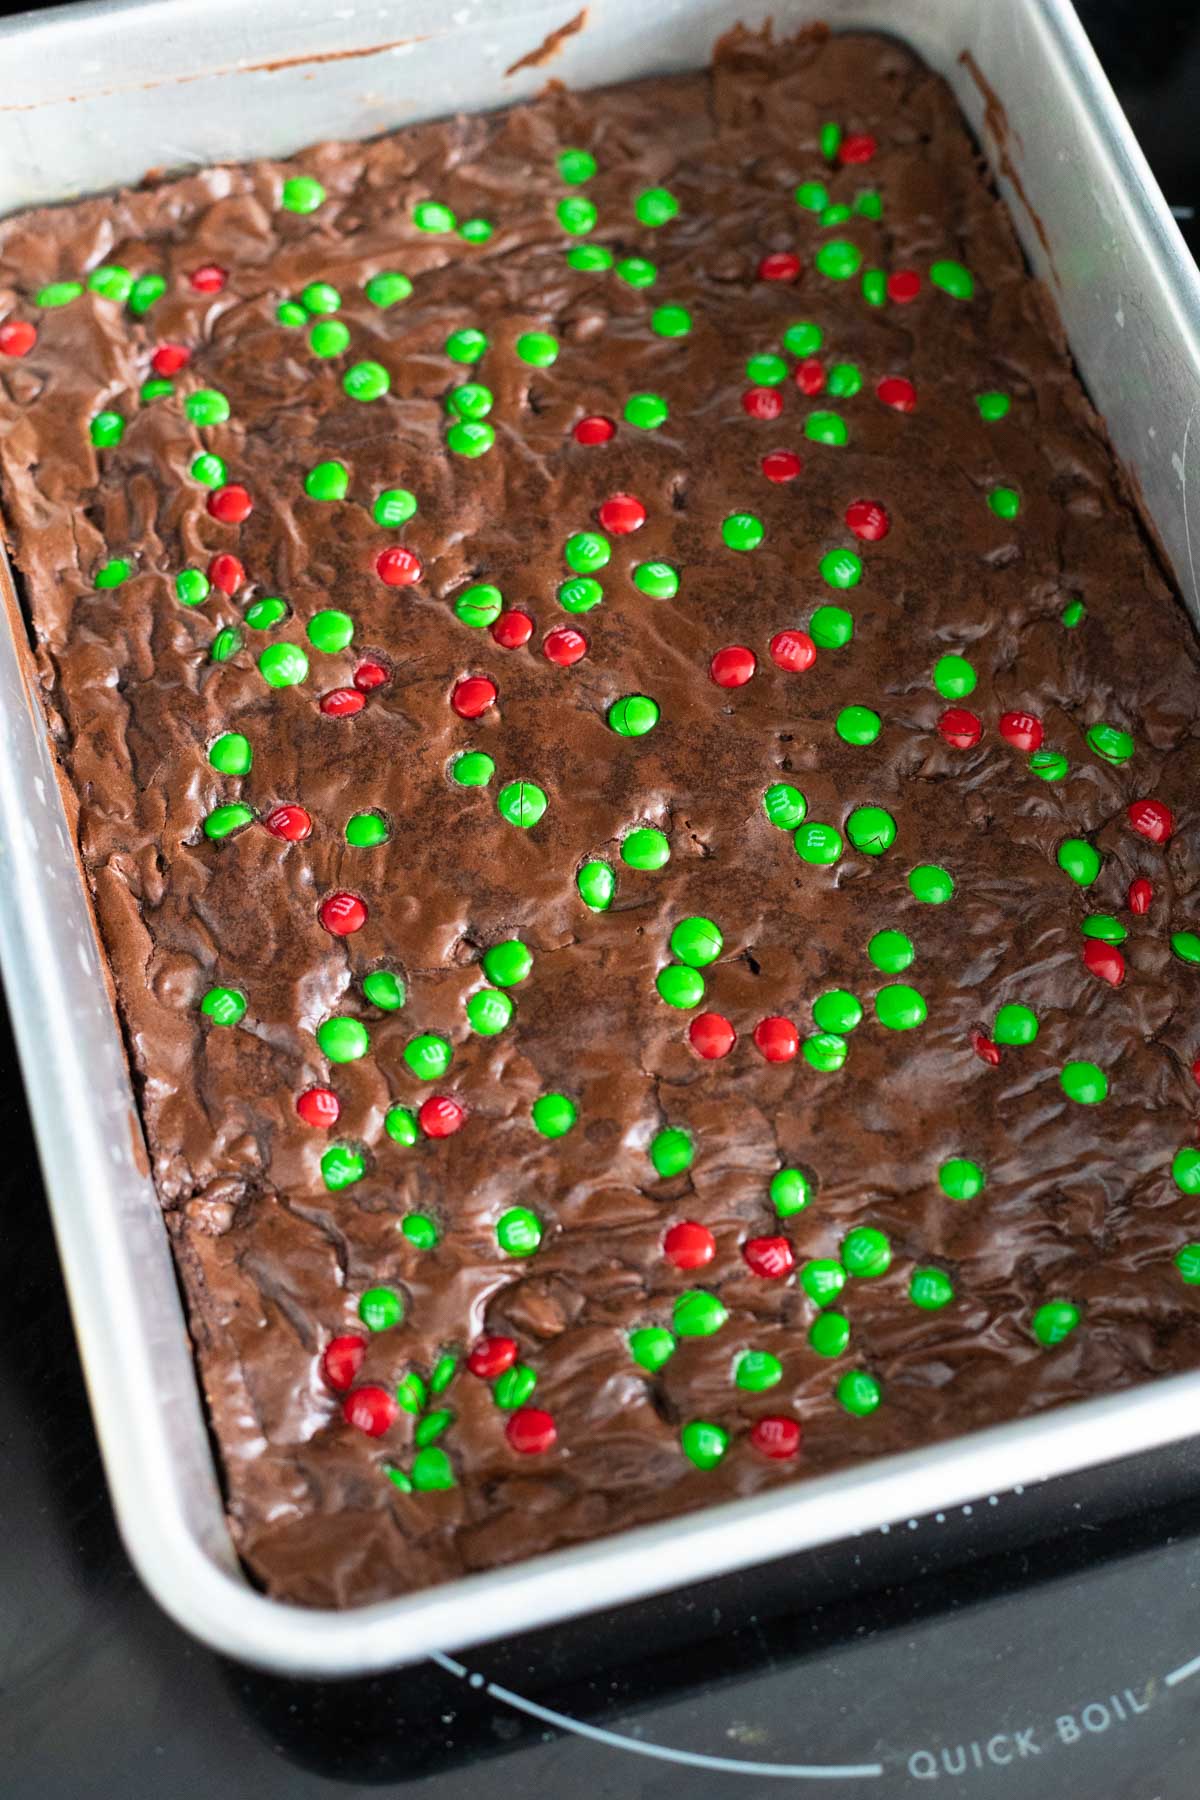 Red and green candies have been pressed into the top of the brownies before baking.